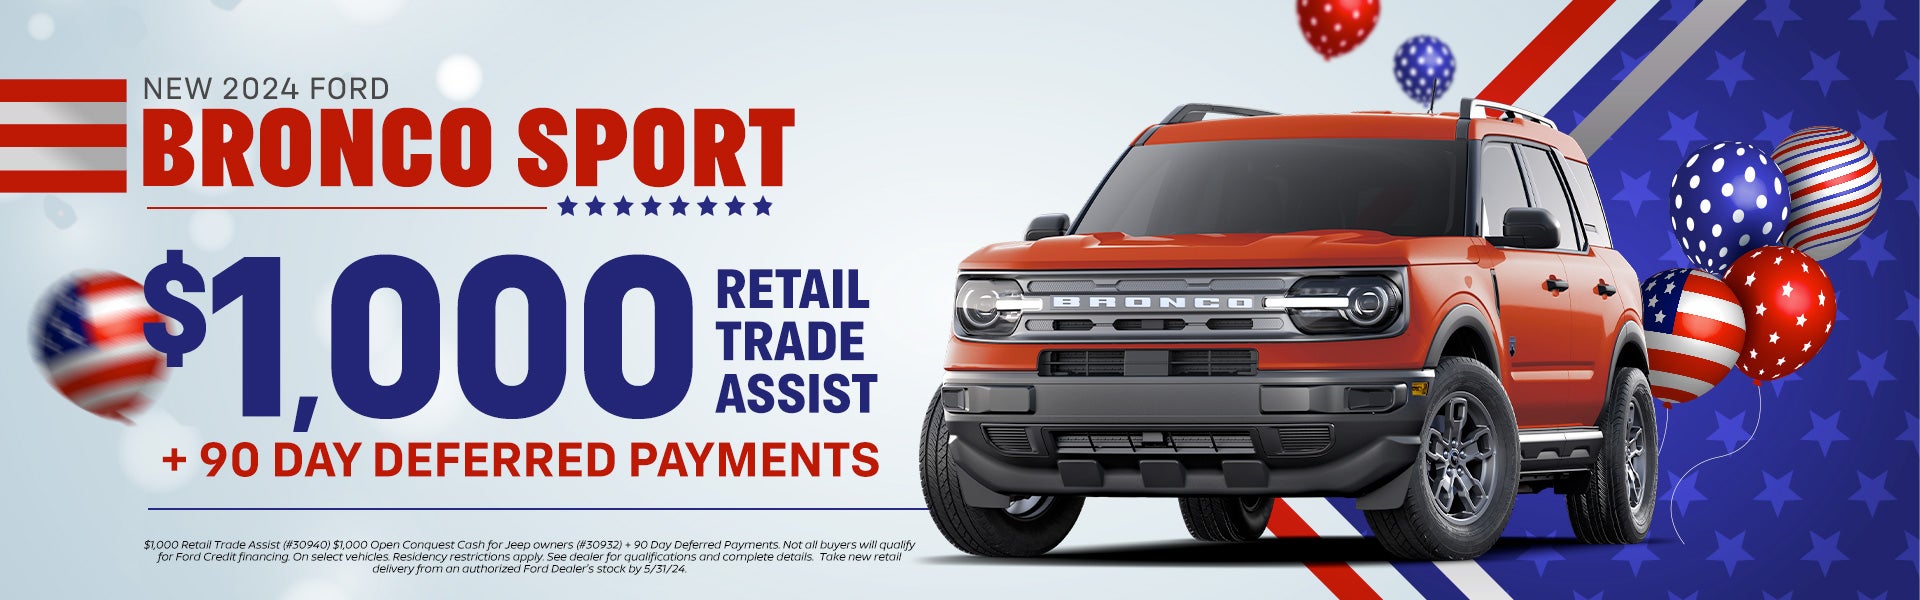 2024 Ford Bronco Sport $1,000 Retail Trade Assist 